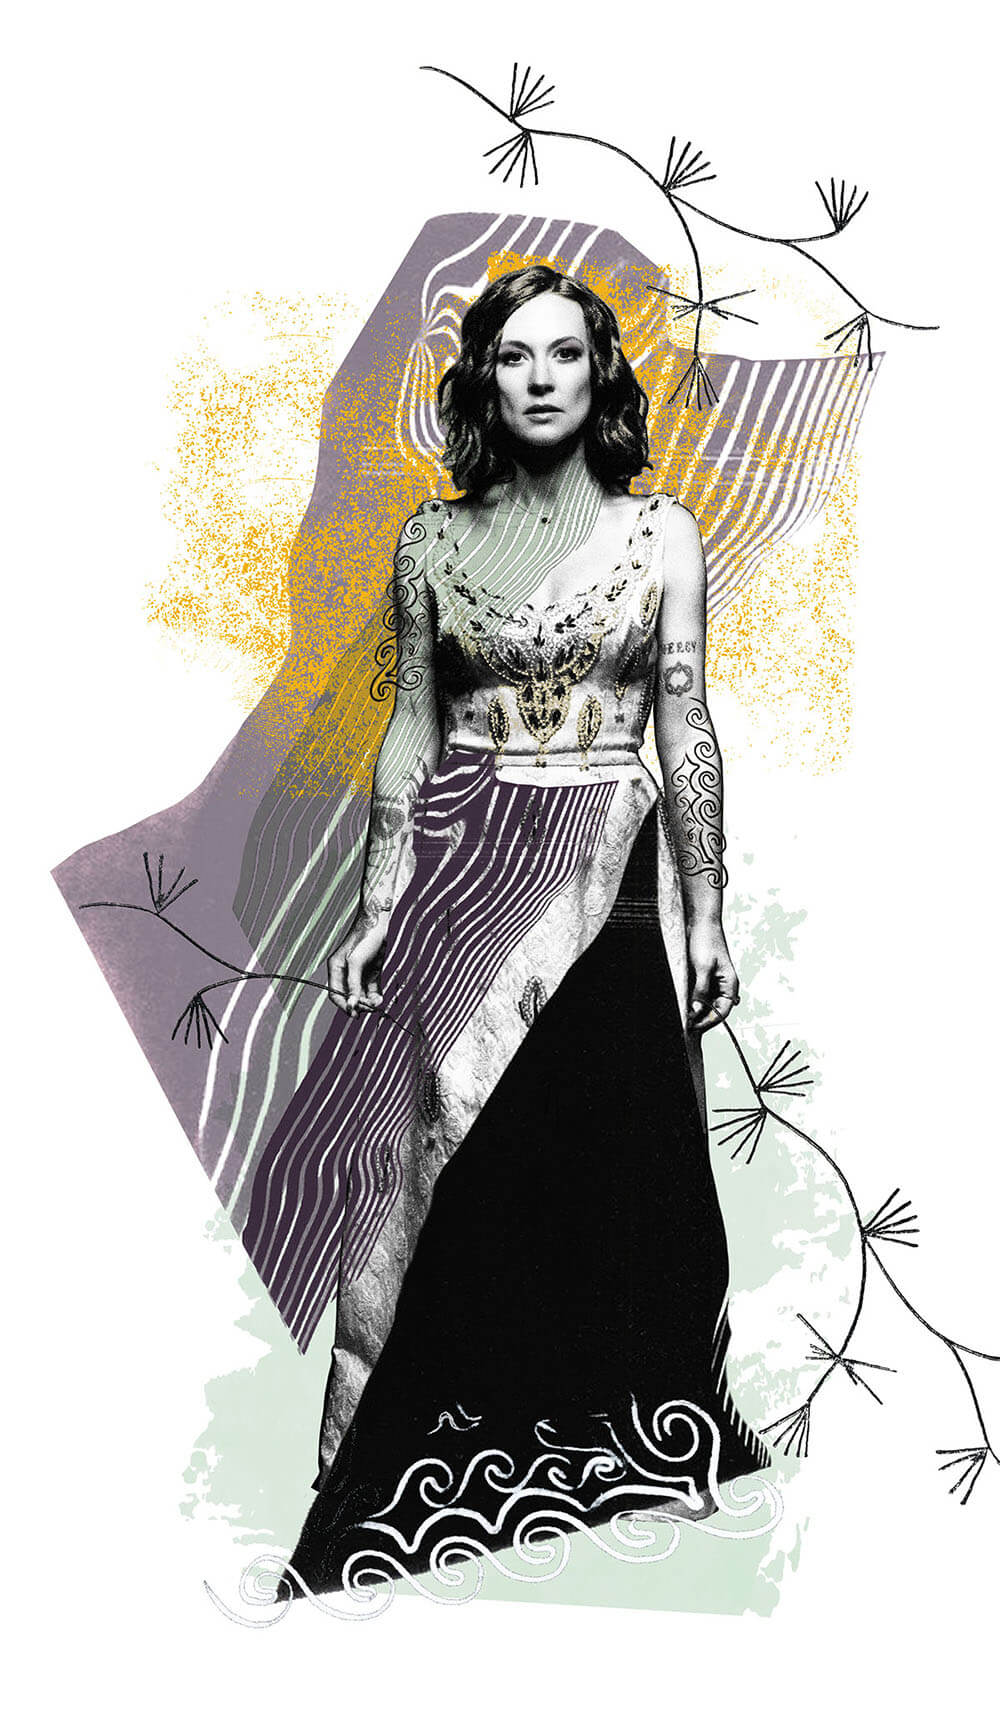 A photo illustration of a woman wearing a long dress surrounded by creative colors and accent lines